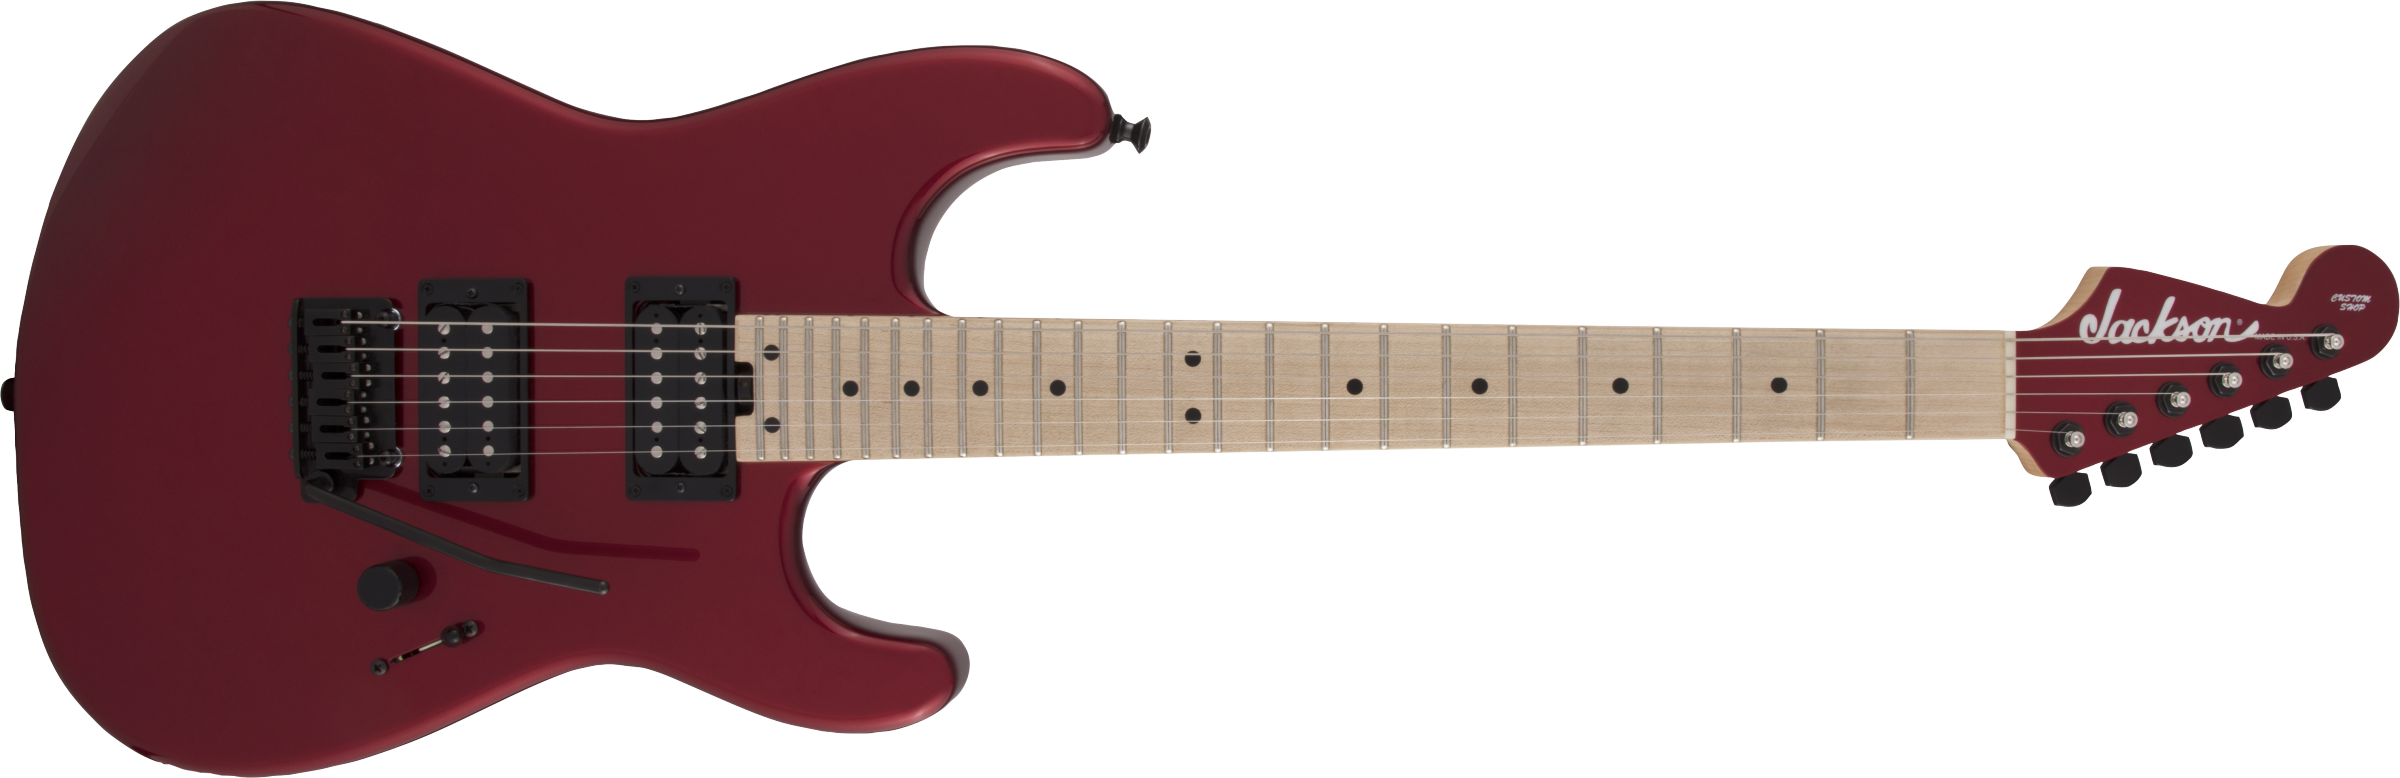 Jackson USA Signature Gus G. San Dimas Style 1, Maple Fingerboard Candy Apple Red 2806815809